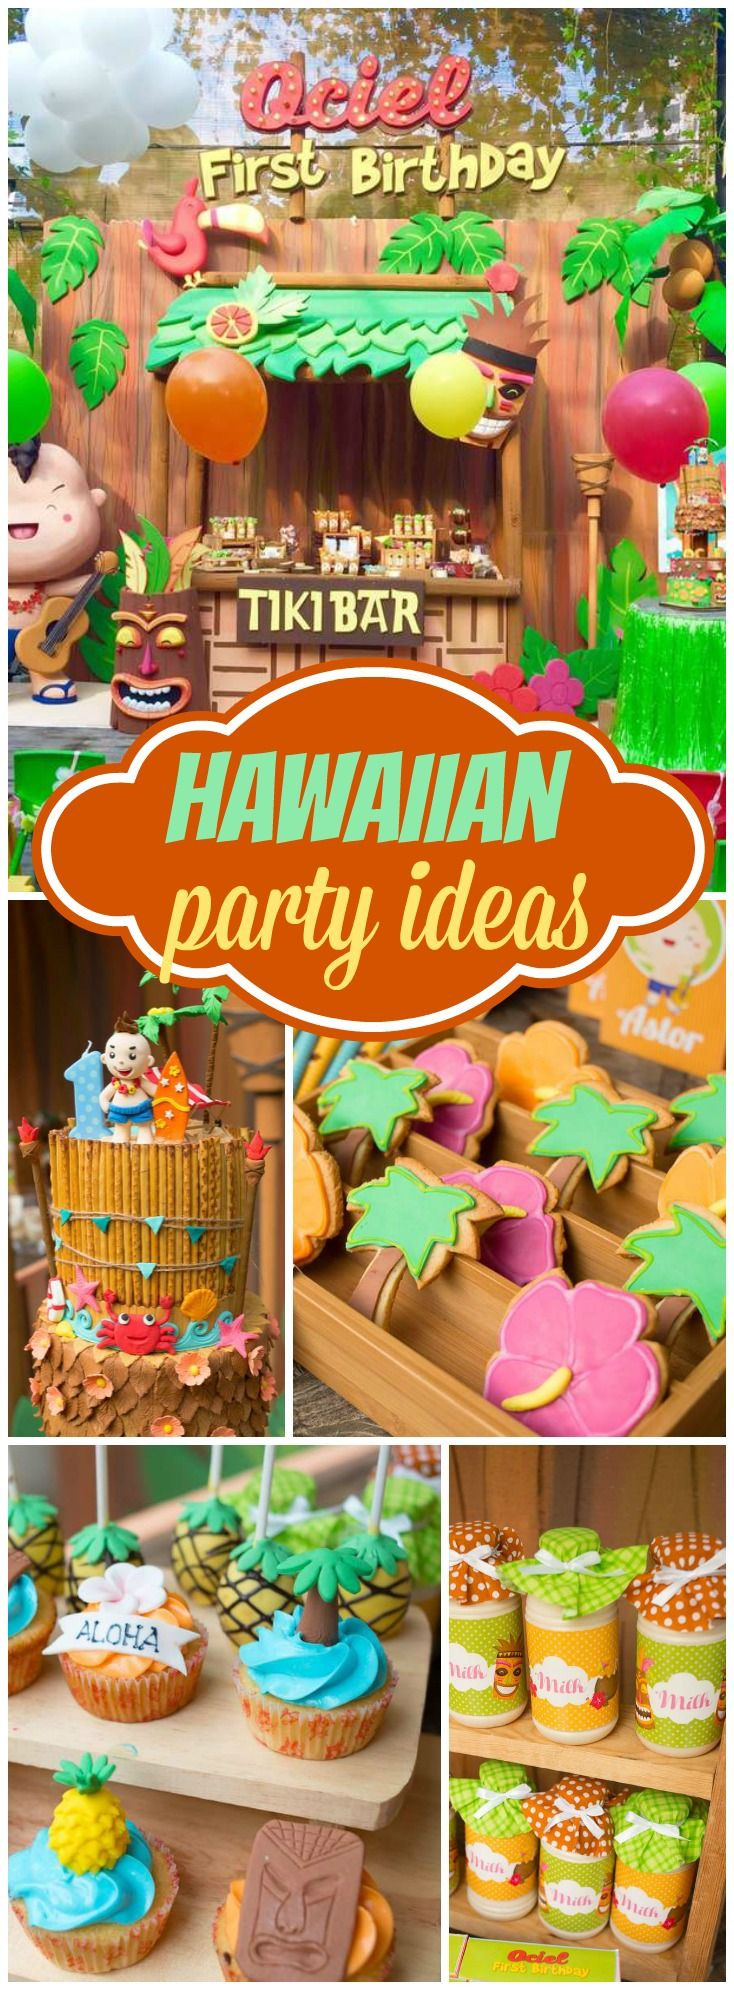 Hawaiian Pool Party Ideas
 You have to see this Hawaiian luau party See more party